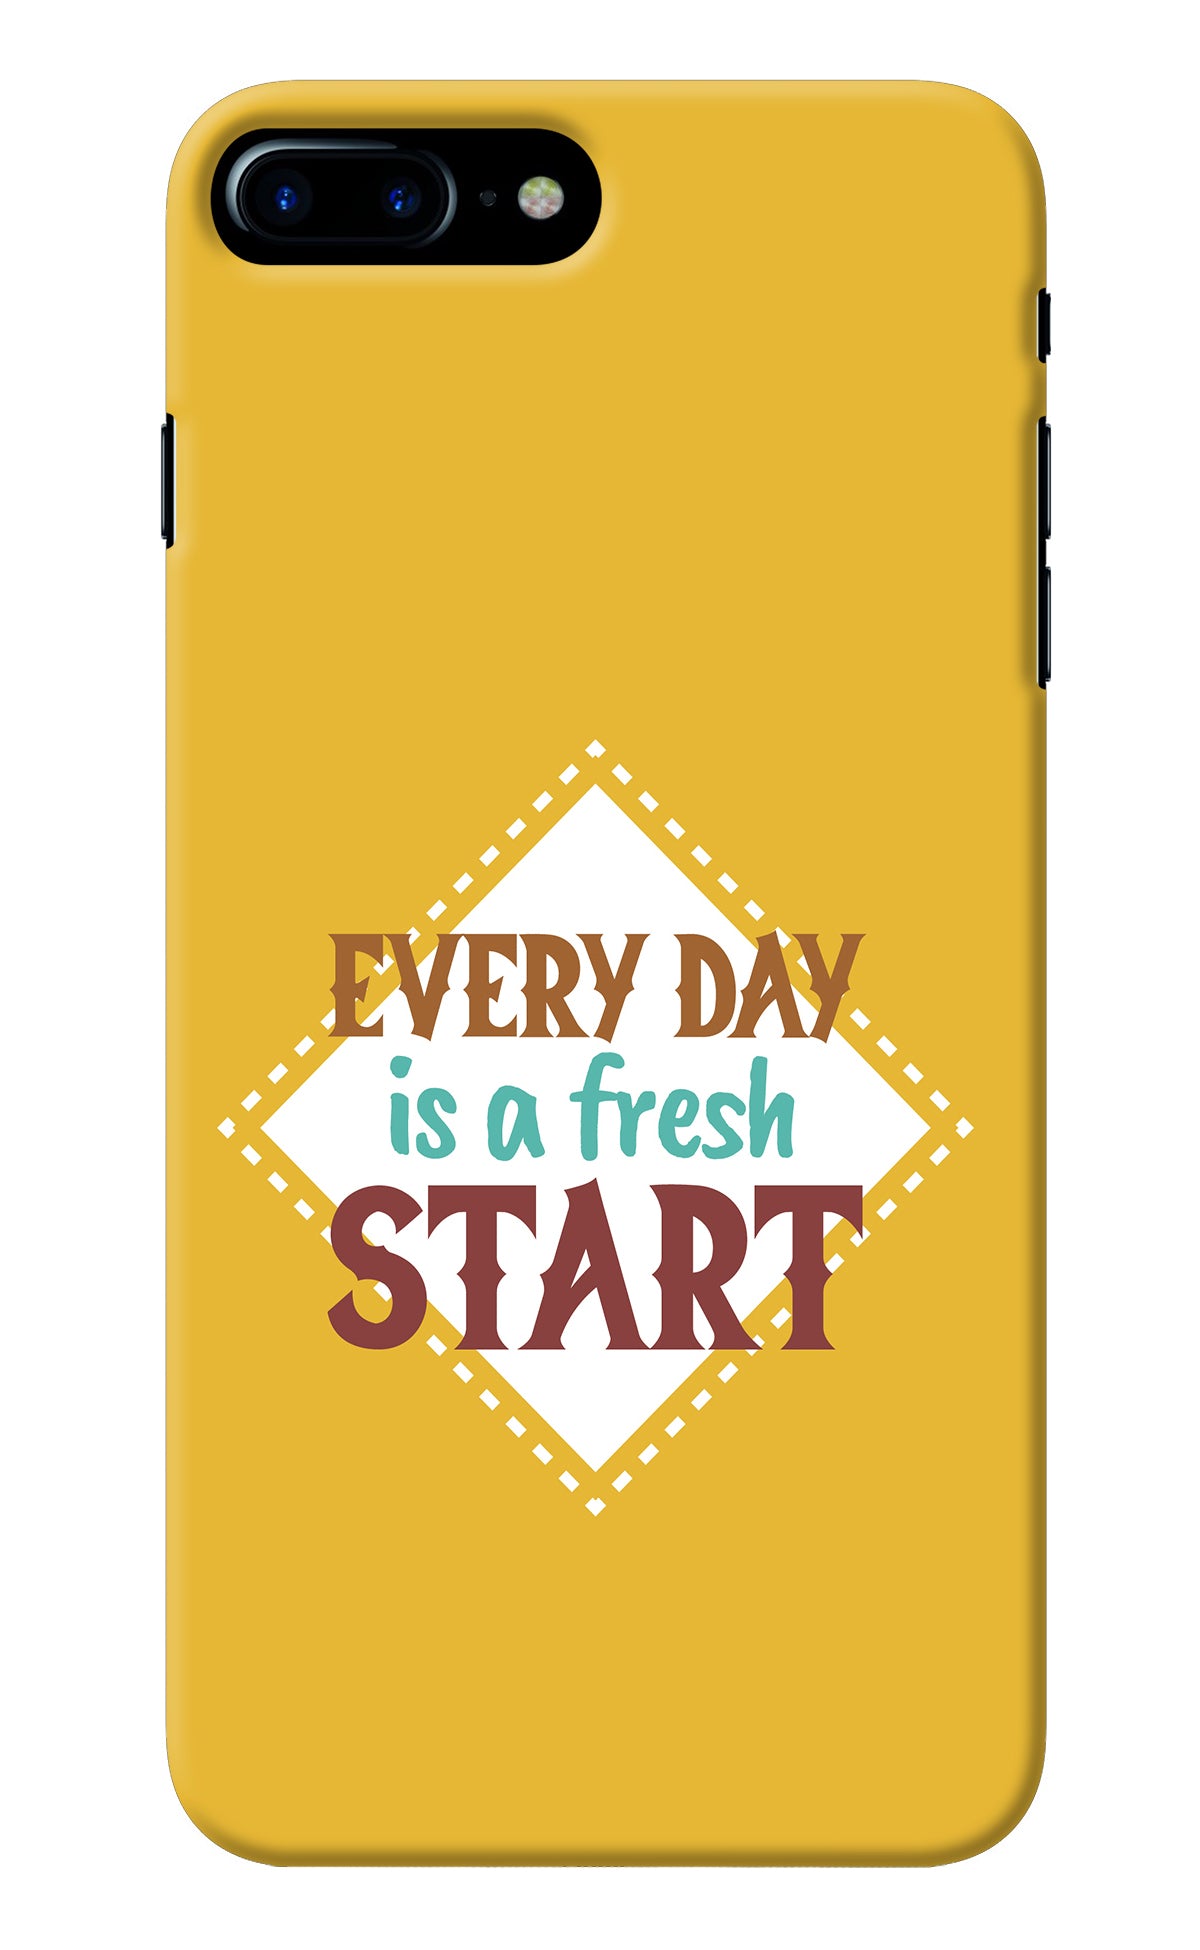 Every day is a Fresh Start iPhone 7 Plus Back Cover